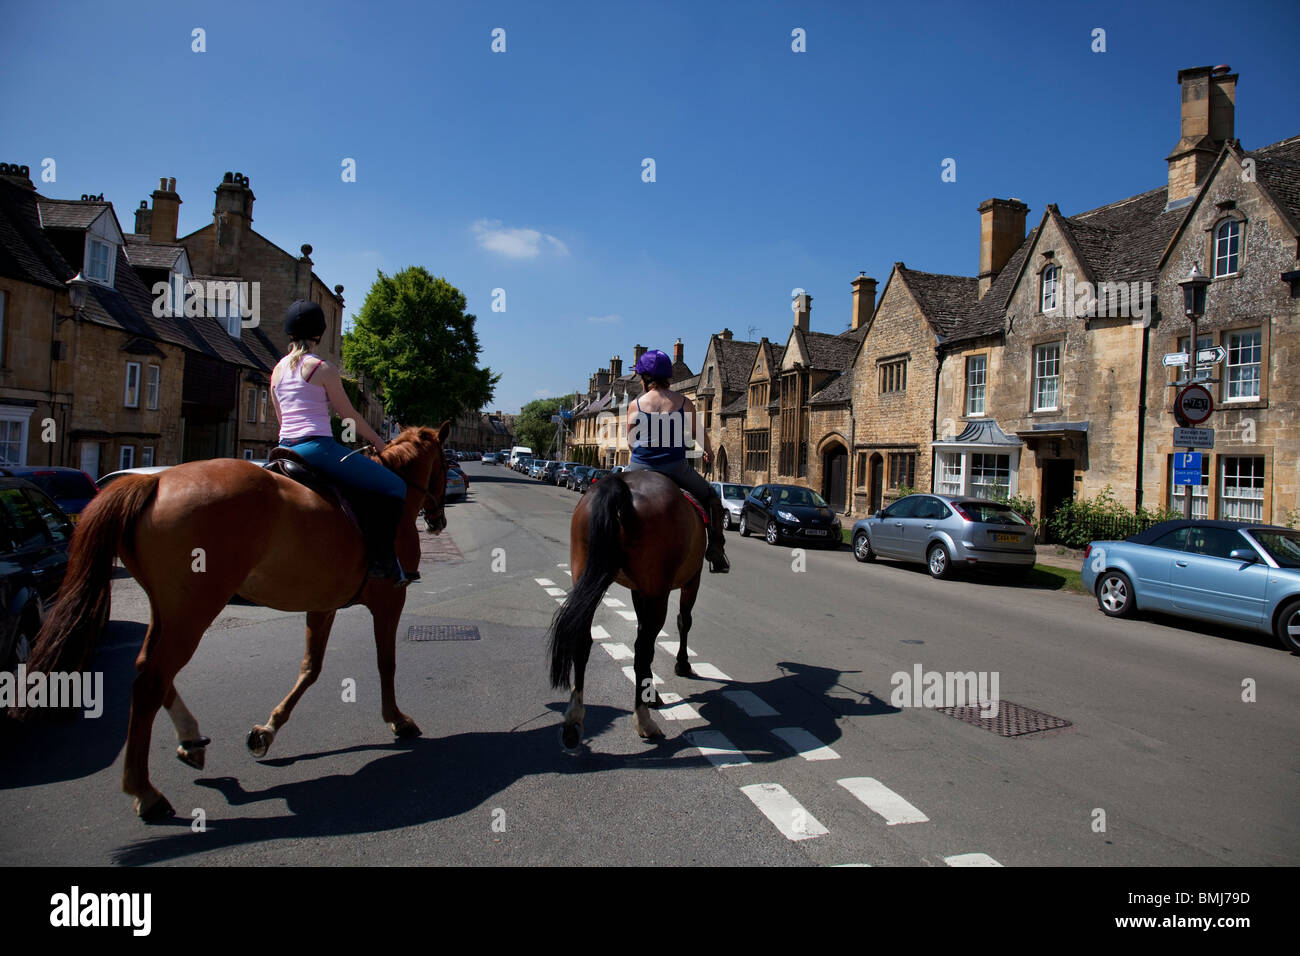 Horse riding past local stone buildings in Chipping Campden. The Cotswolds, Gloucestershire, UK. Stock Photo